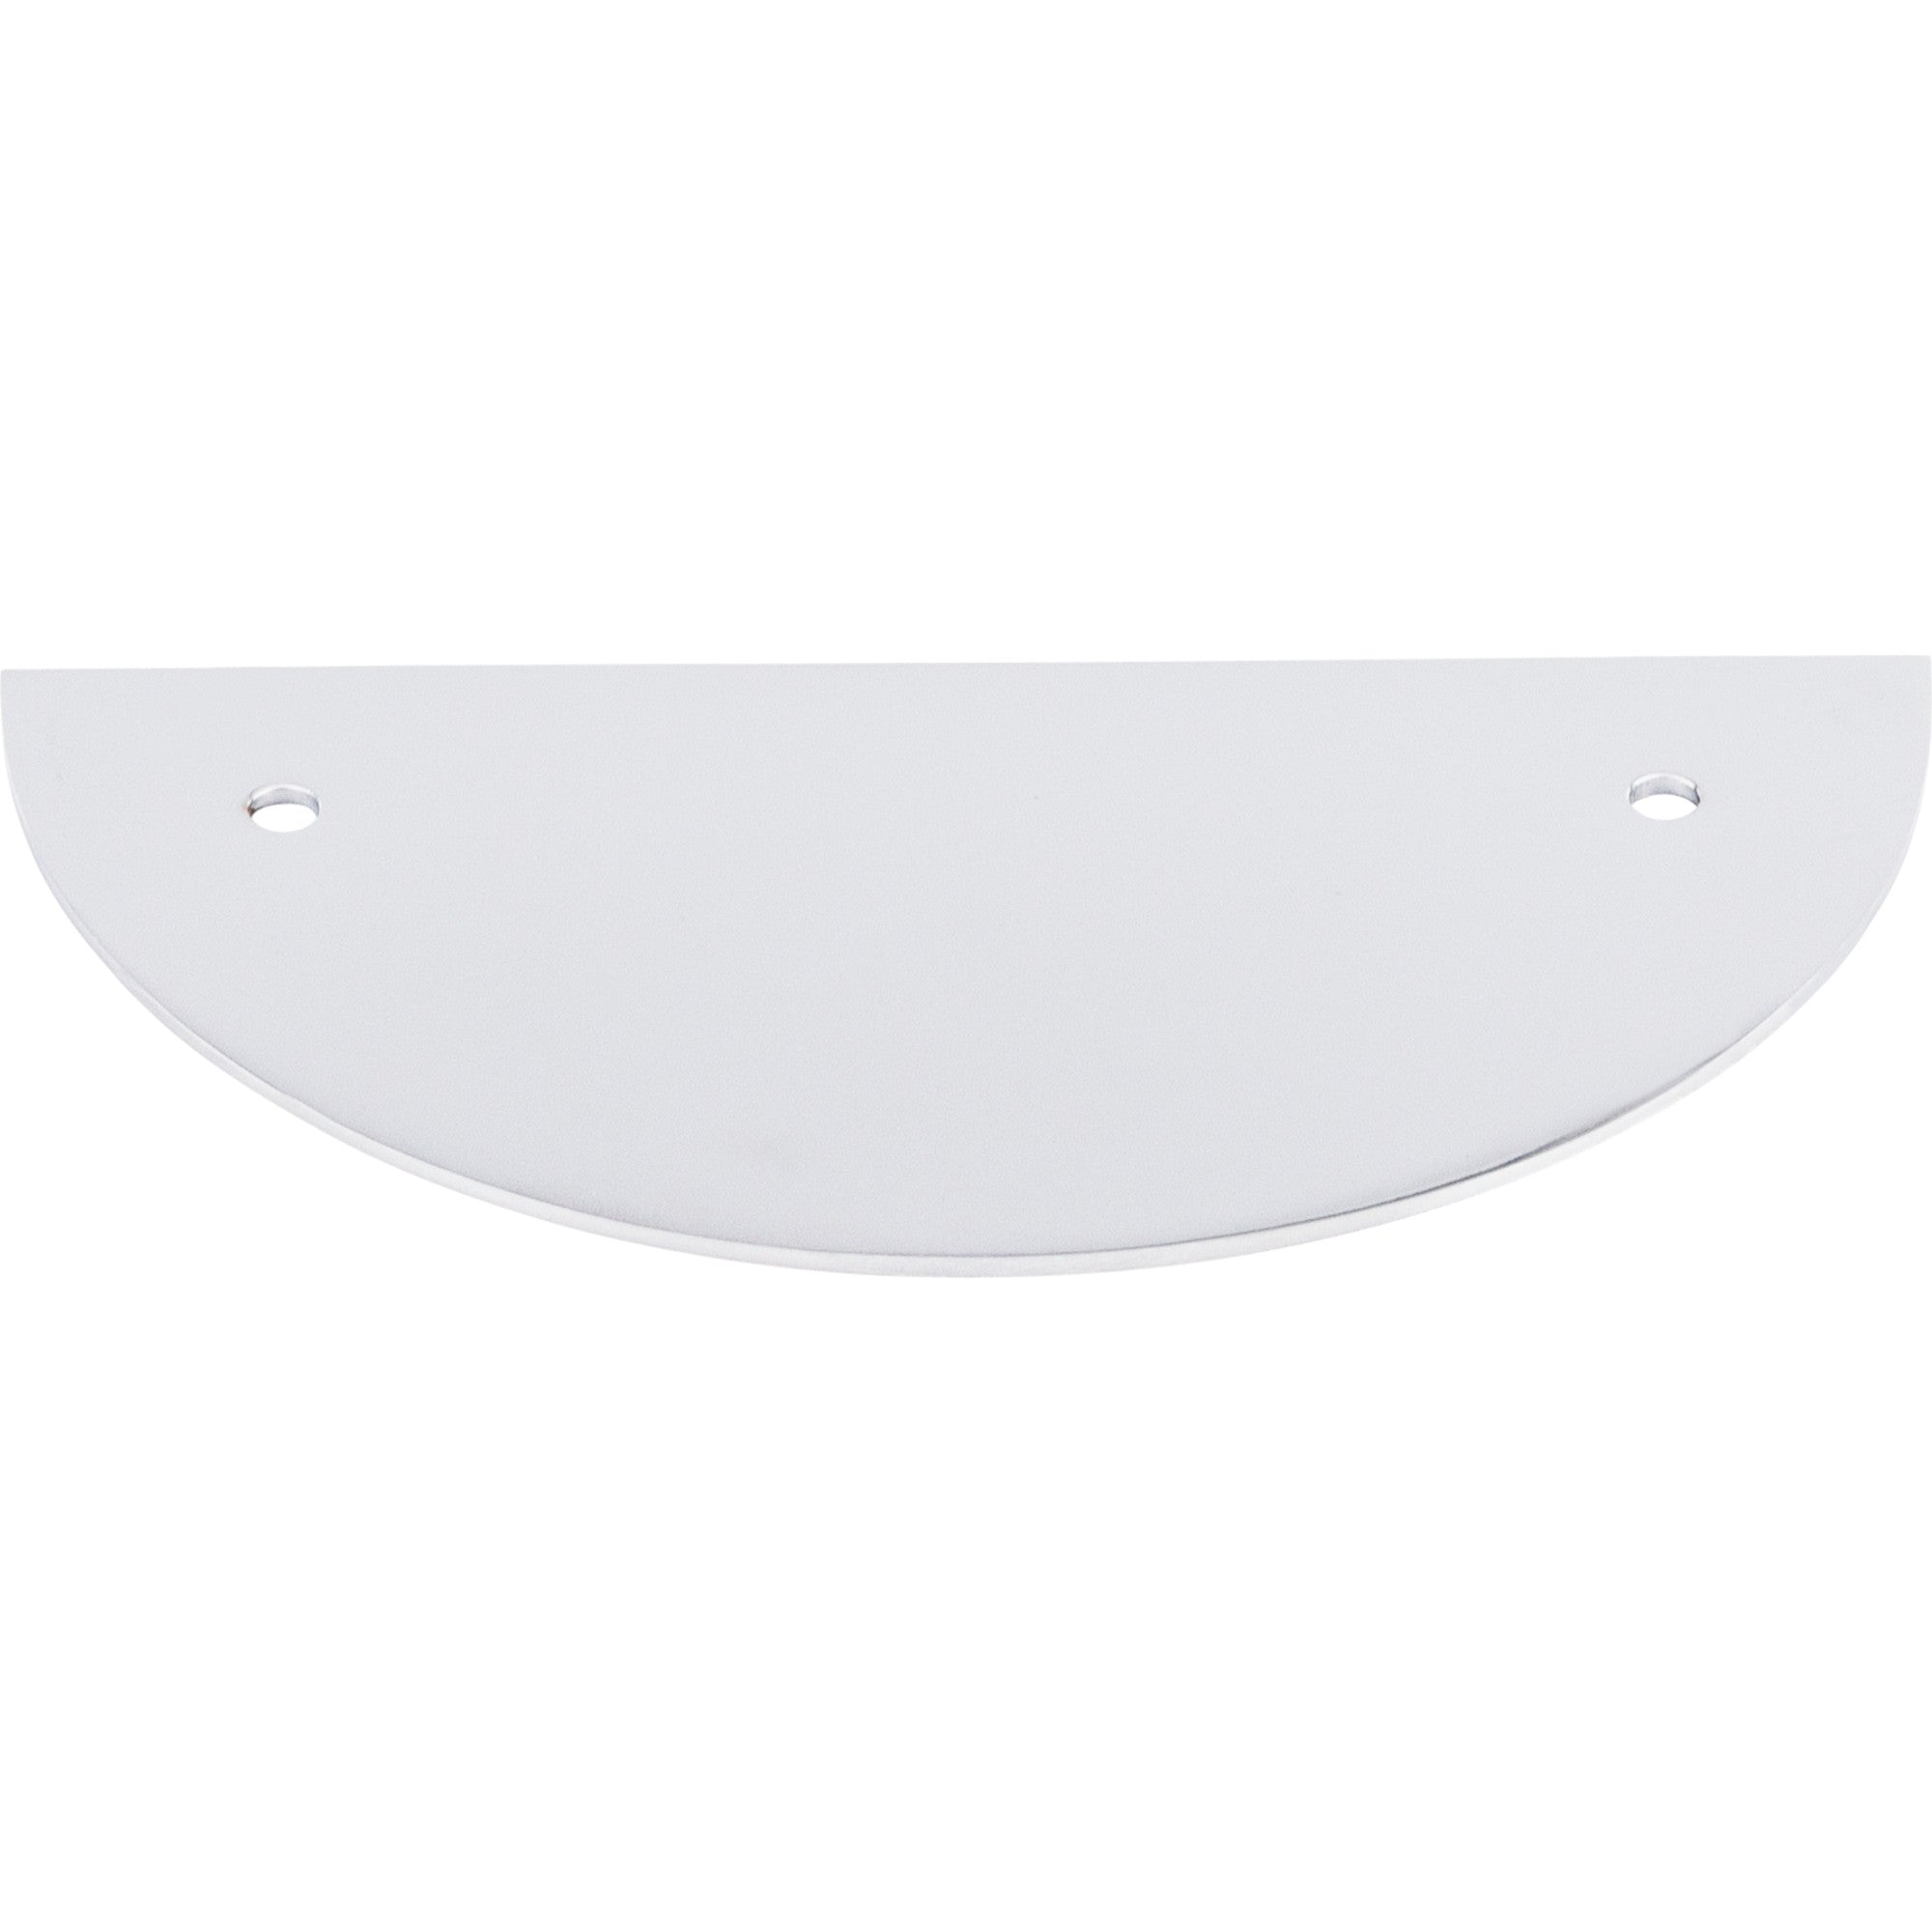 Top Knobs - Hardware - Half Circle Back Plate - Polished Nickel - Union Lighting Luminaires Décor